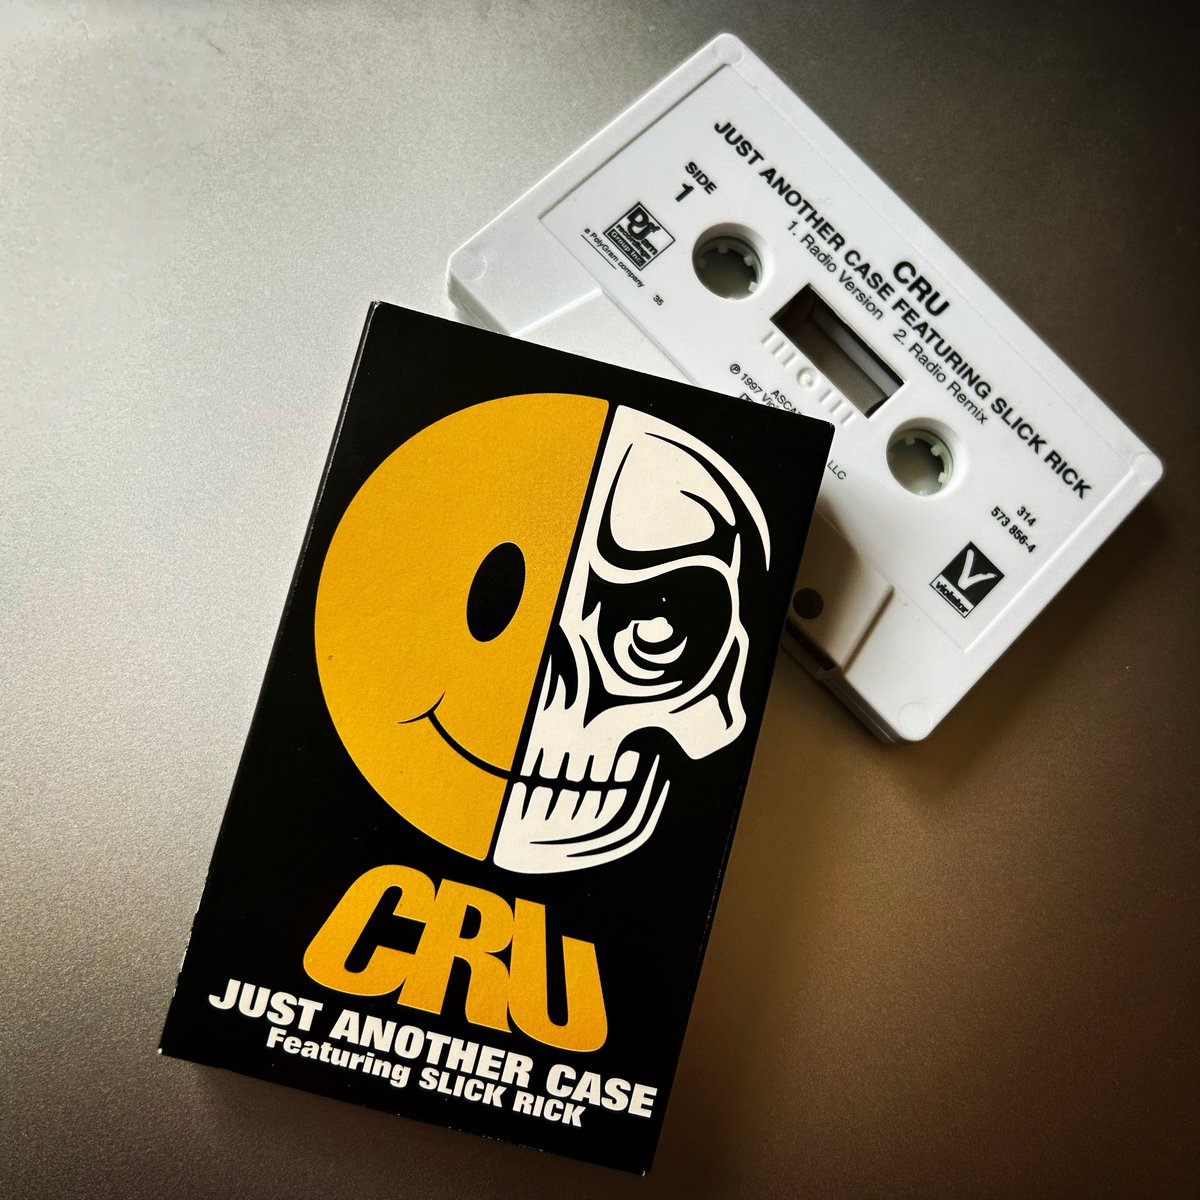 CRU featuring Slick Rick - Just Another Case

#justanothercase #radioedit #radio #remix #pronto #radioversion #classic #hiphop #cassette #single #violator #defjam #dadirty30 #ripthemightyha #forever #celebrated #slickrick #cru #hiphopgods